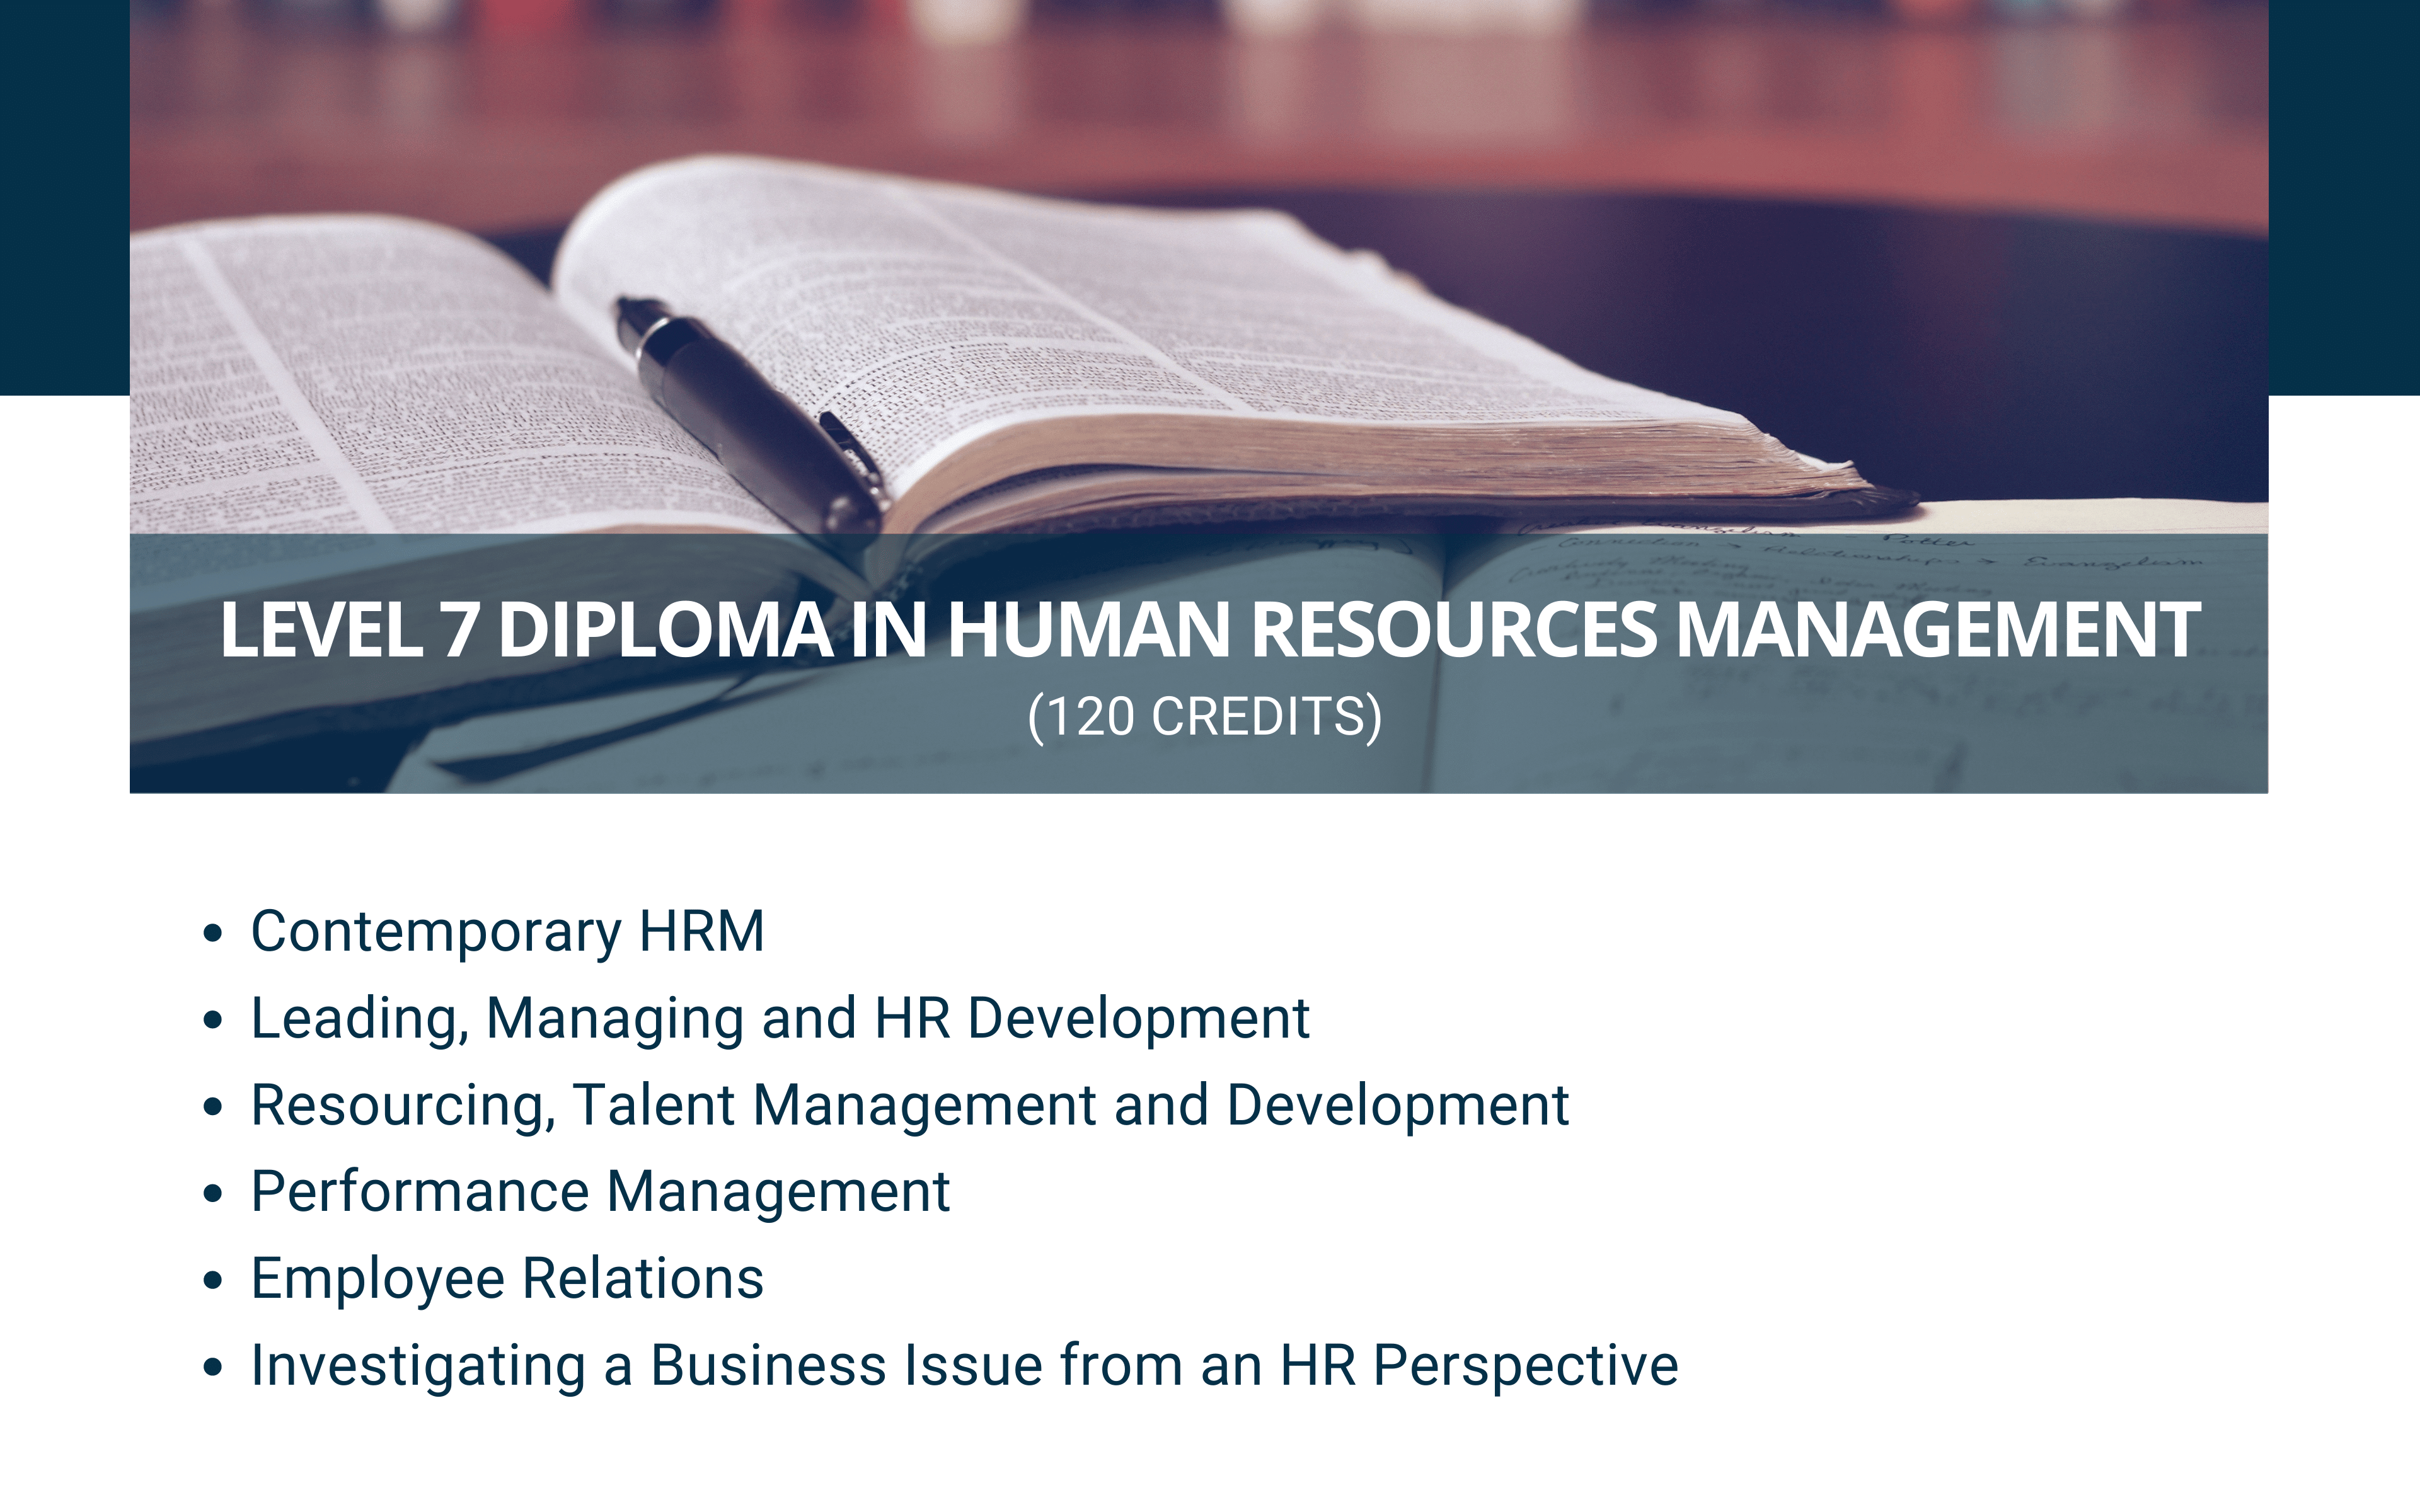 Level 7 Diploma in human Resources Management